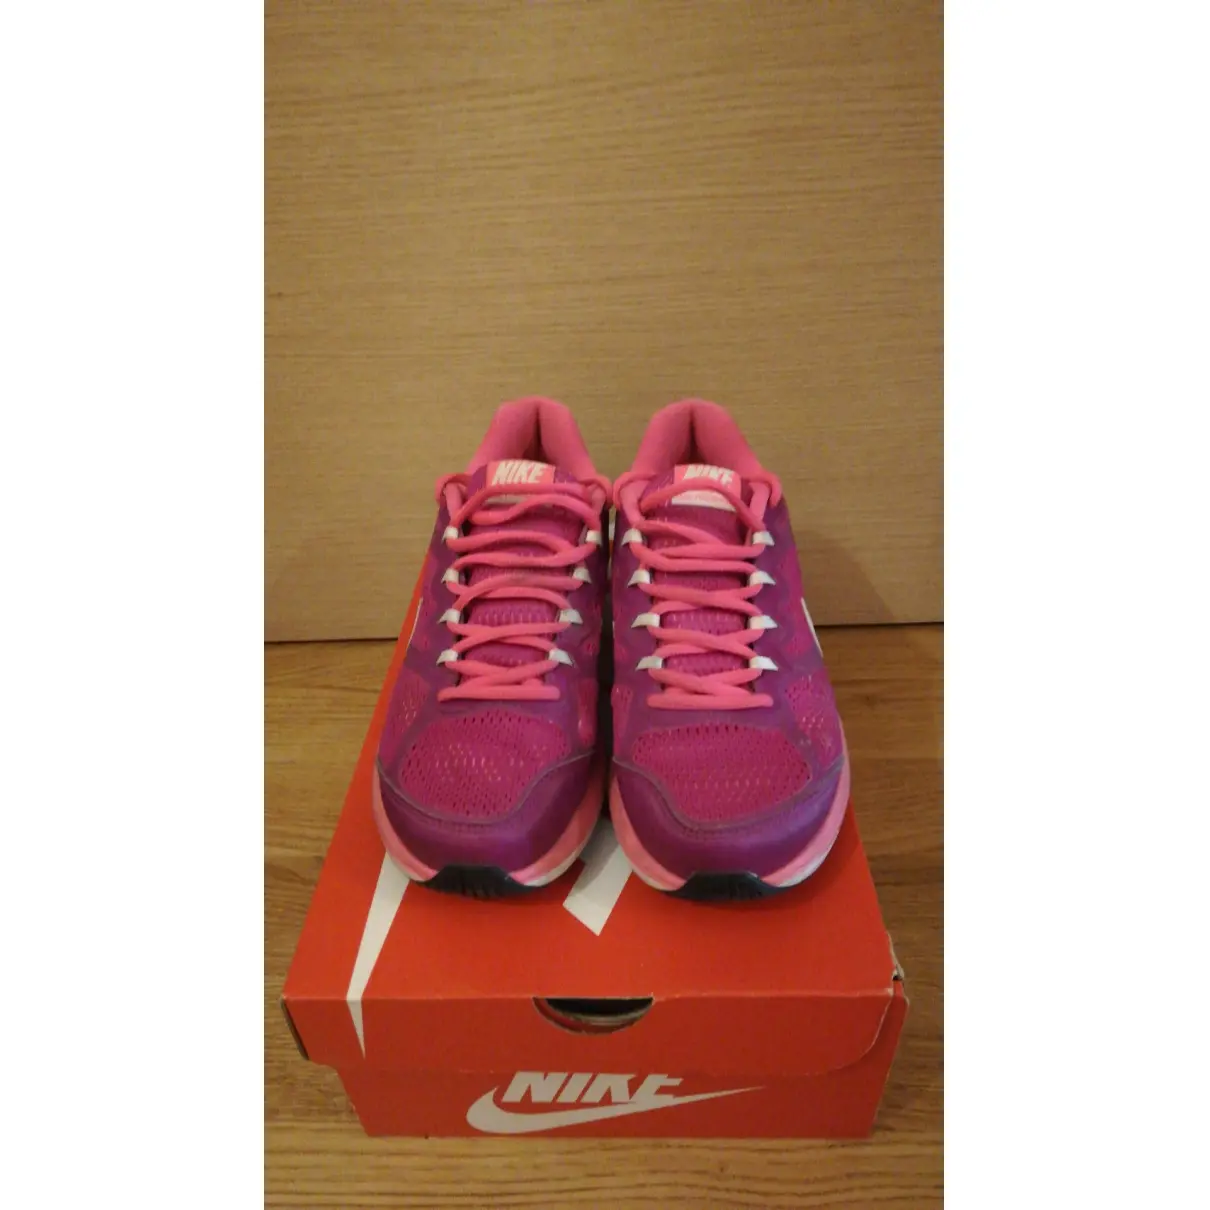 Buy Nike Cloth trainers online